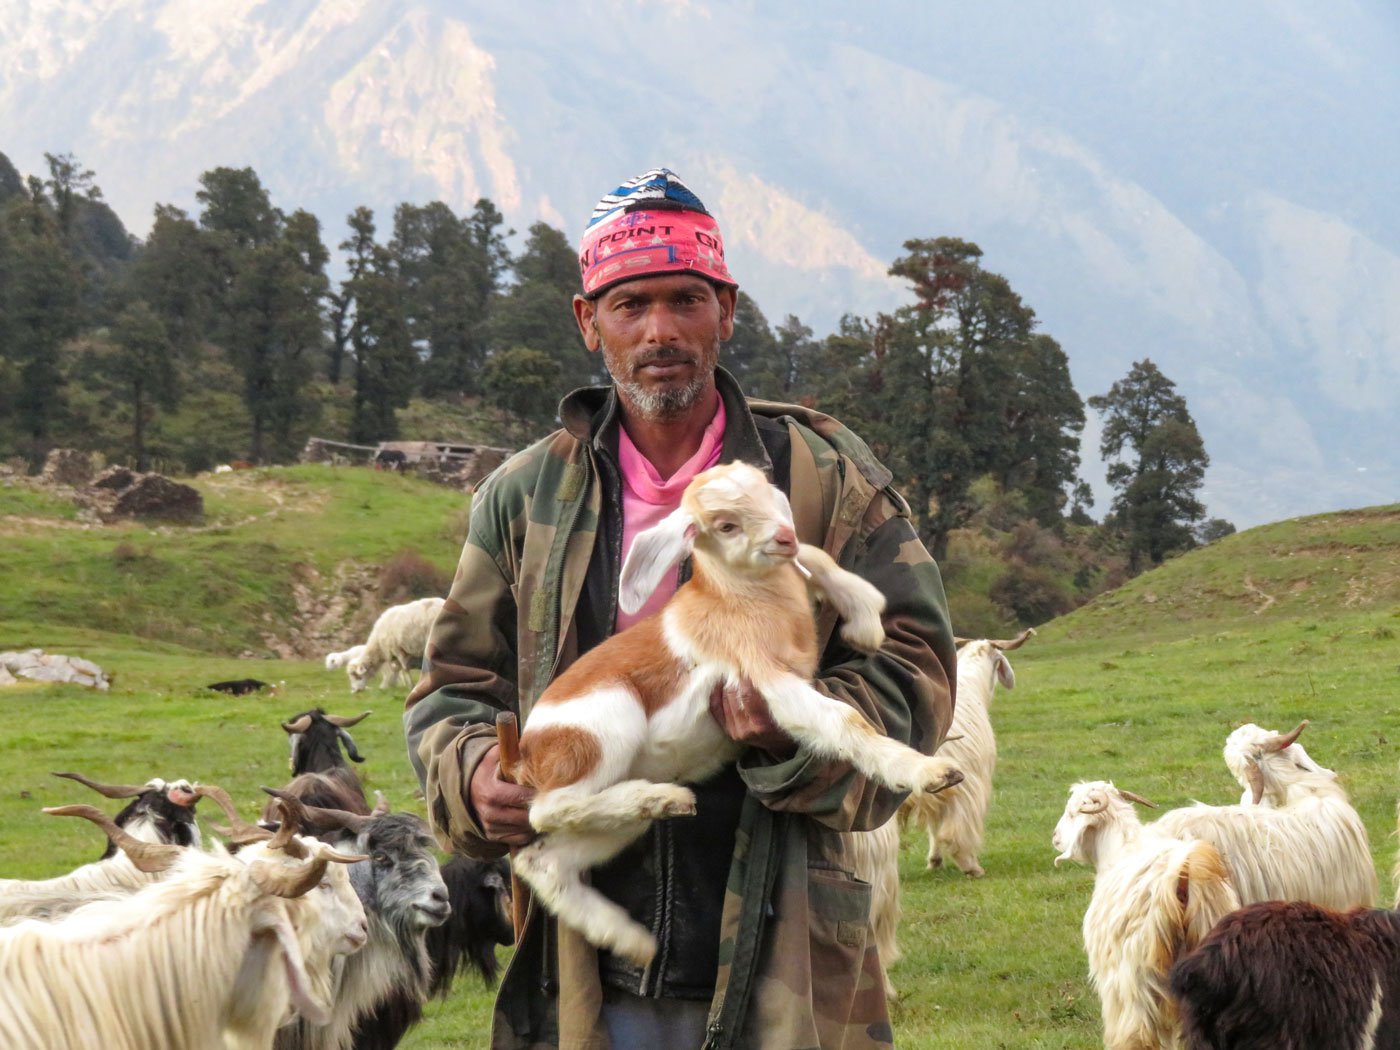 In this region of the Himalayas, shepherds brave the wet and cold weather to graze their sheep and goats. They also protect them from wild animals on the Gangotri range where they live for up to nine months a year